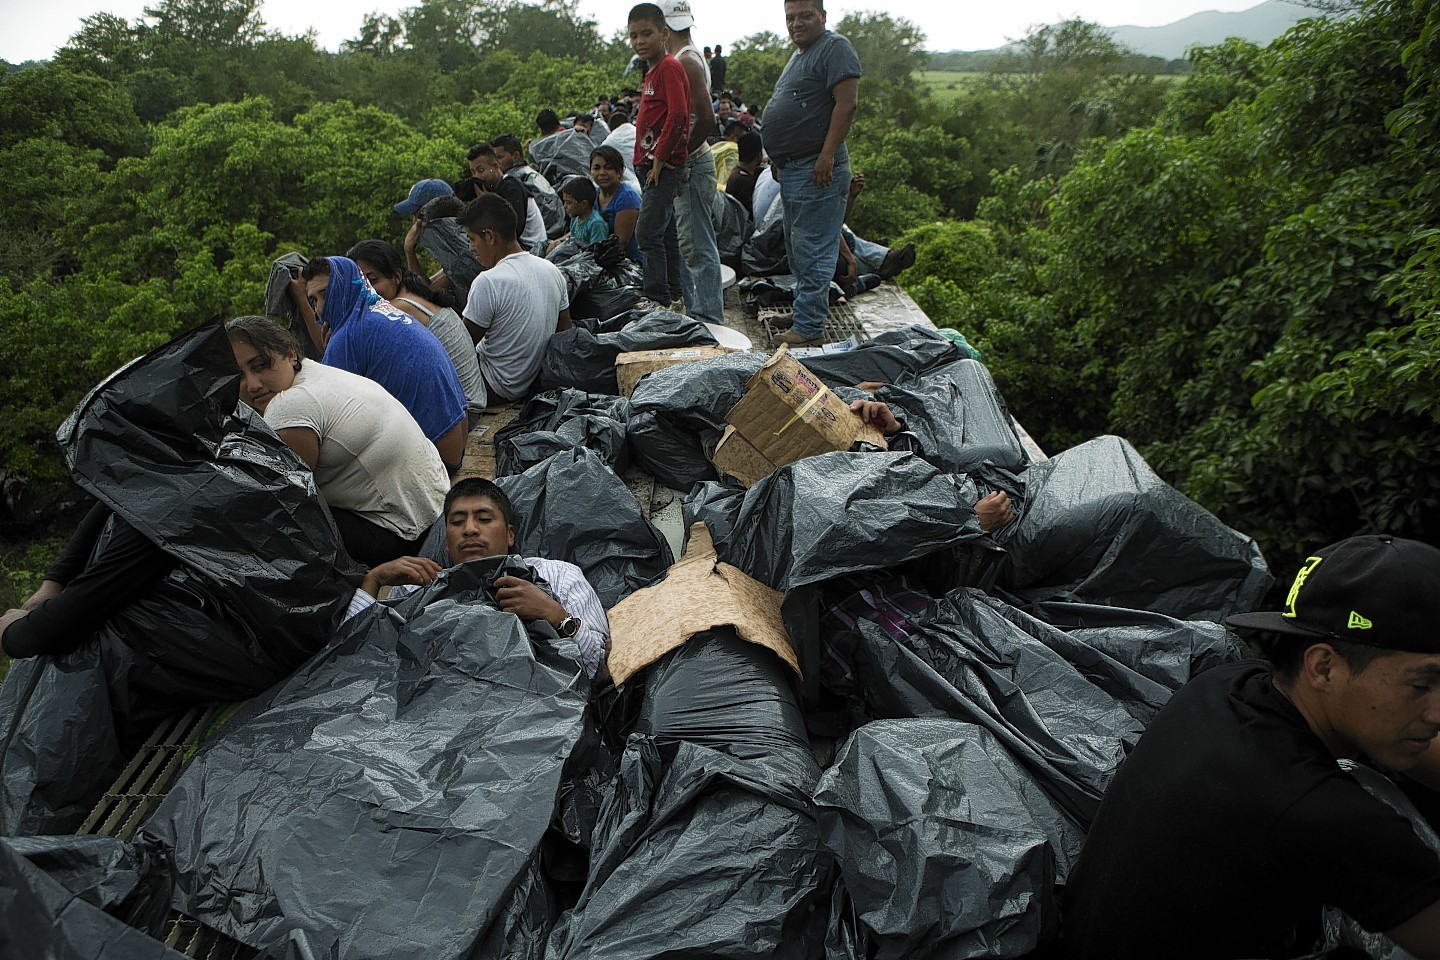 Central American migrants use trash bags and cardboard to protect themselves from the rain as they wait atop a stuck freight train, outside Reforma de Pineda, Chiapas state, Mexico. 